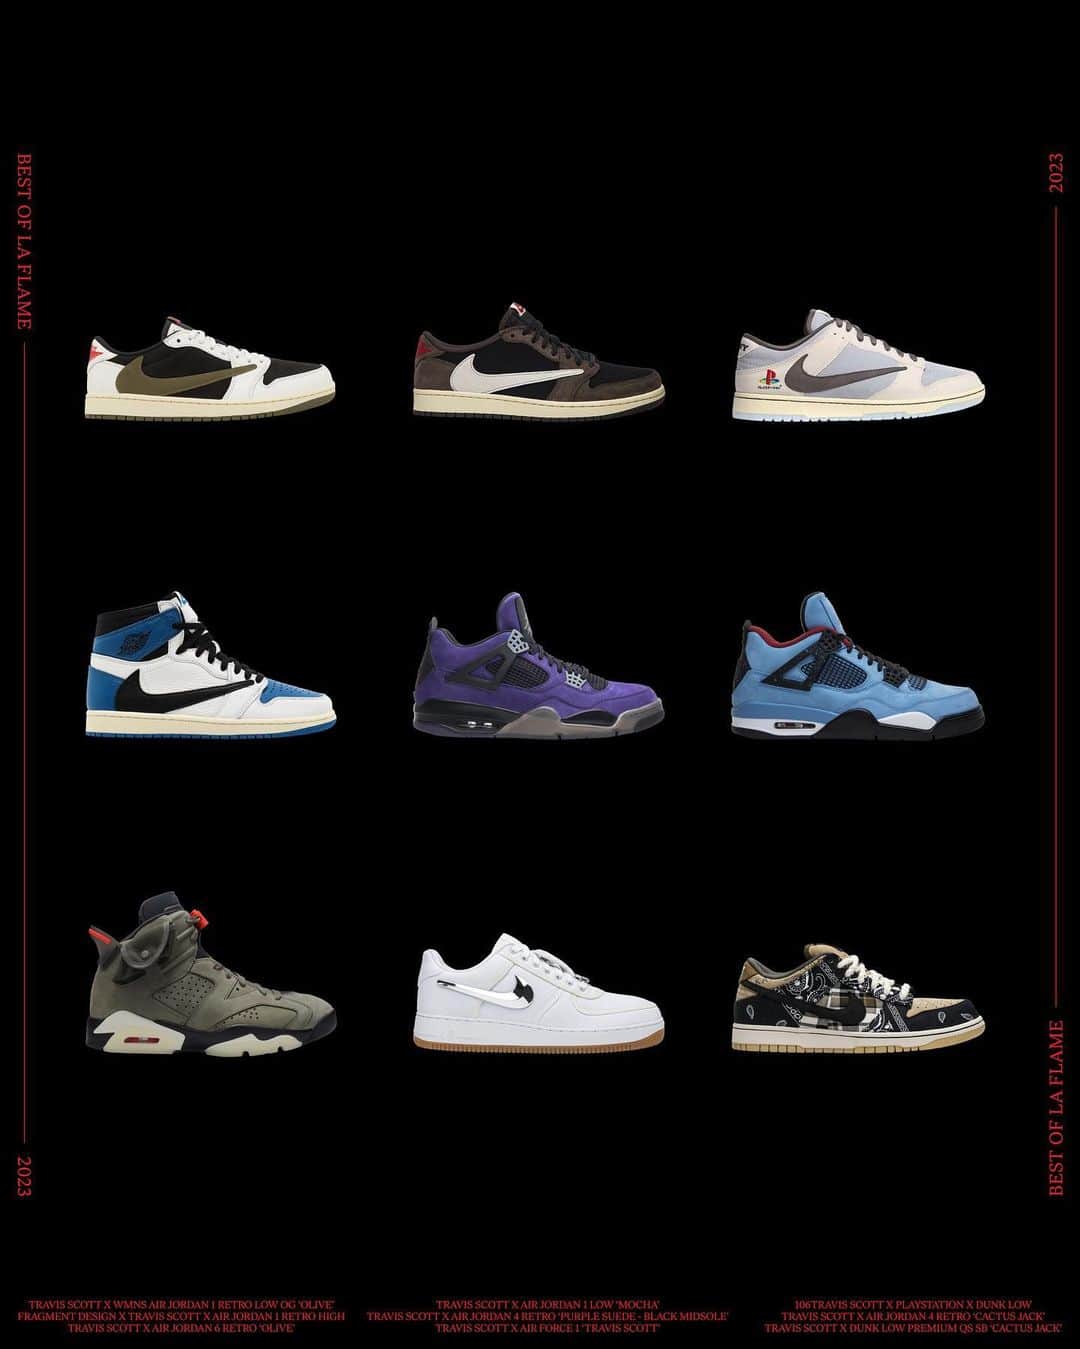 Flight Clubのインスタグラム：「Best of La Flame. Travis Scott's unique vision has produced some of history's most sought-after releases, from recent Jordan collabs to coveted SB Dunks and AF1s. Explore every colorway from his prolific Nike partnership now at Flight Club.」